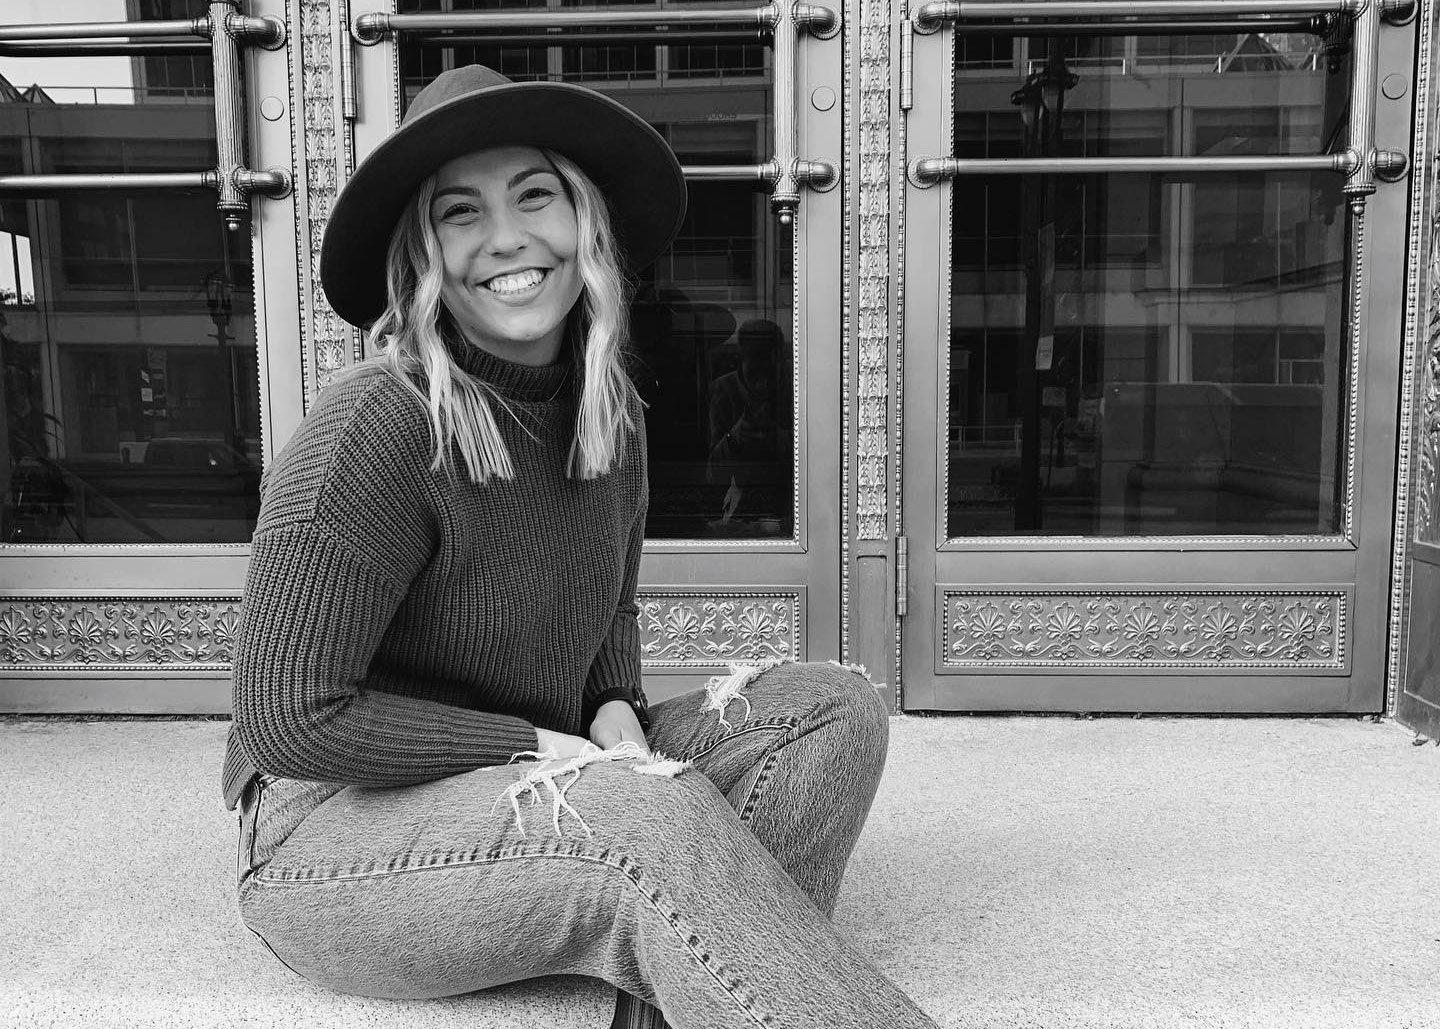 **A woman in a hat and jeans sitting on steps.**